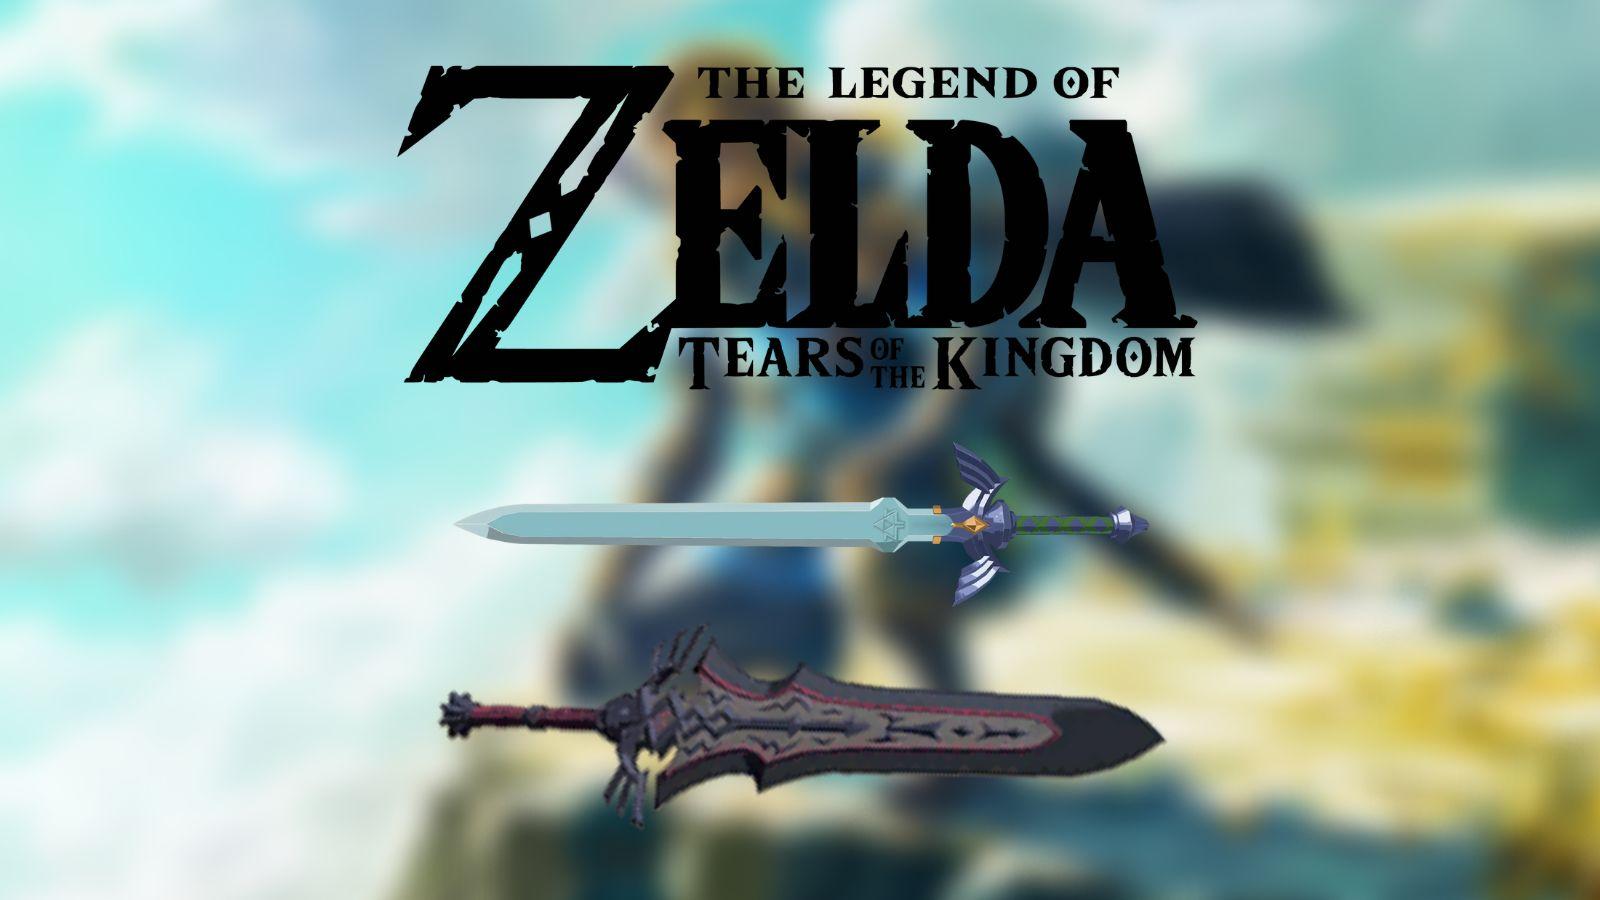 Master Sword BOTW  Breath of the Wild and Tears of the Kingdom